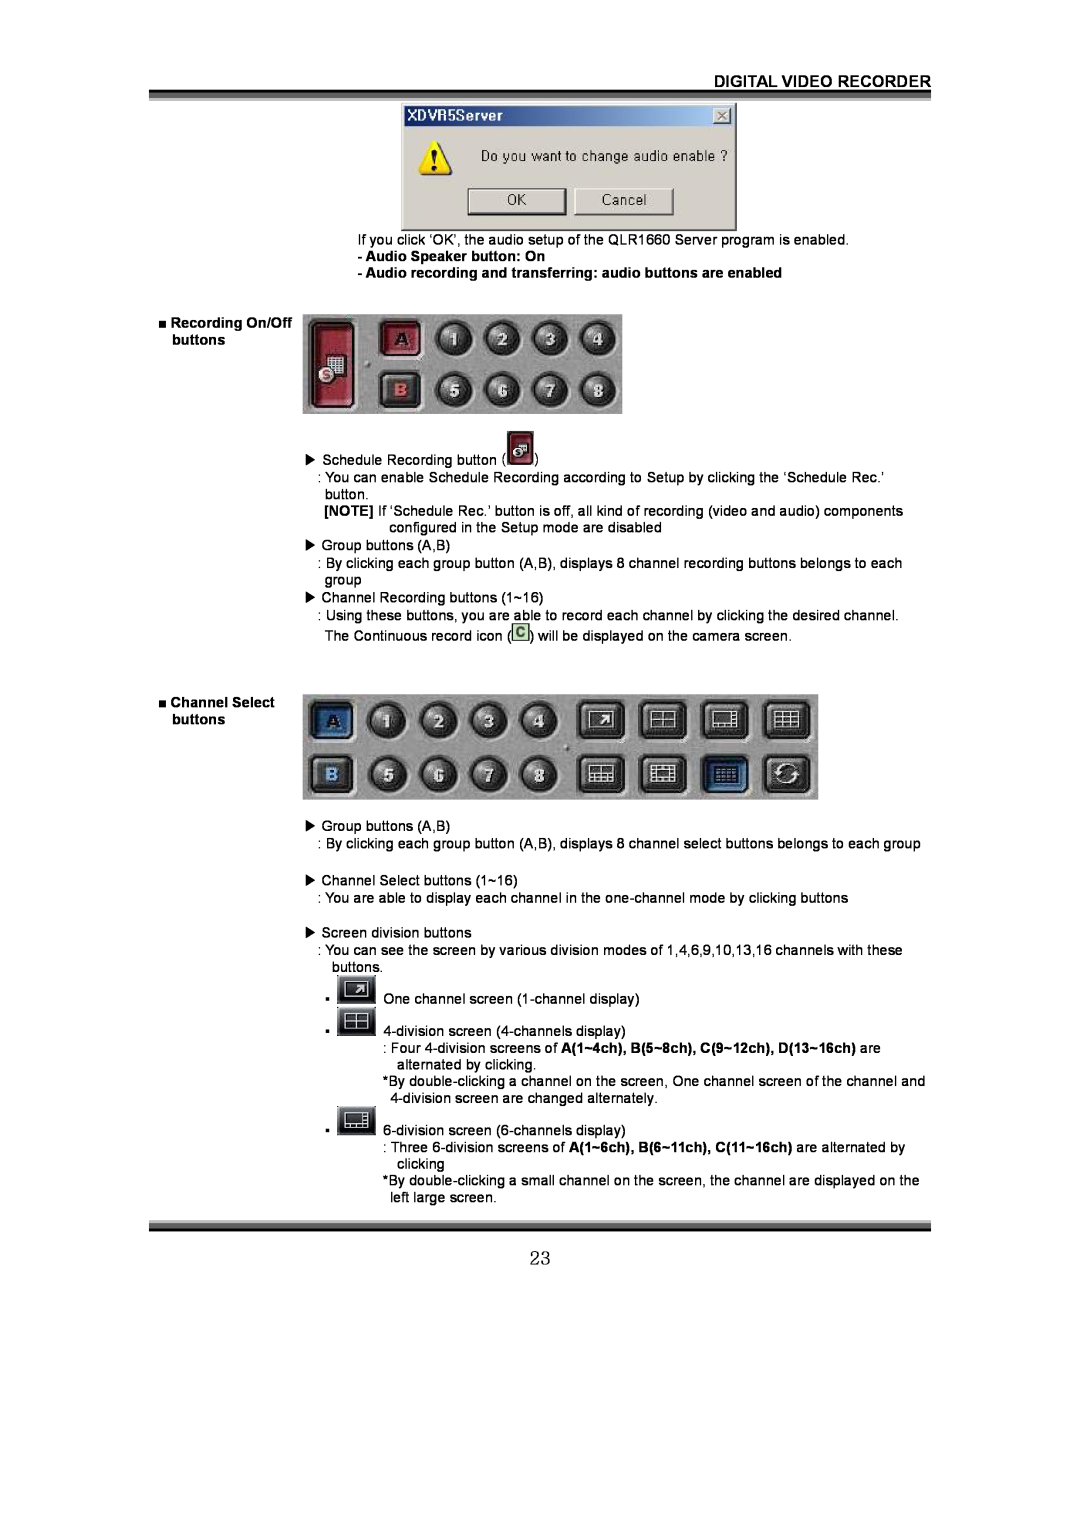 LOREX Technology QLR1660 instruction manual Audio Speaker button: On, Recording On/Off buttons, Channel Select buttons 